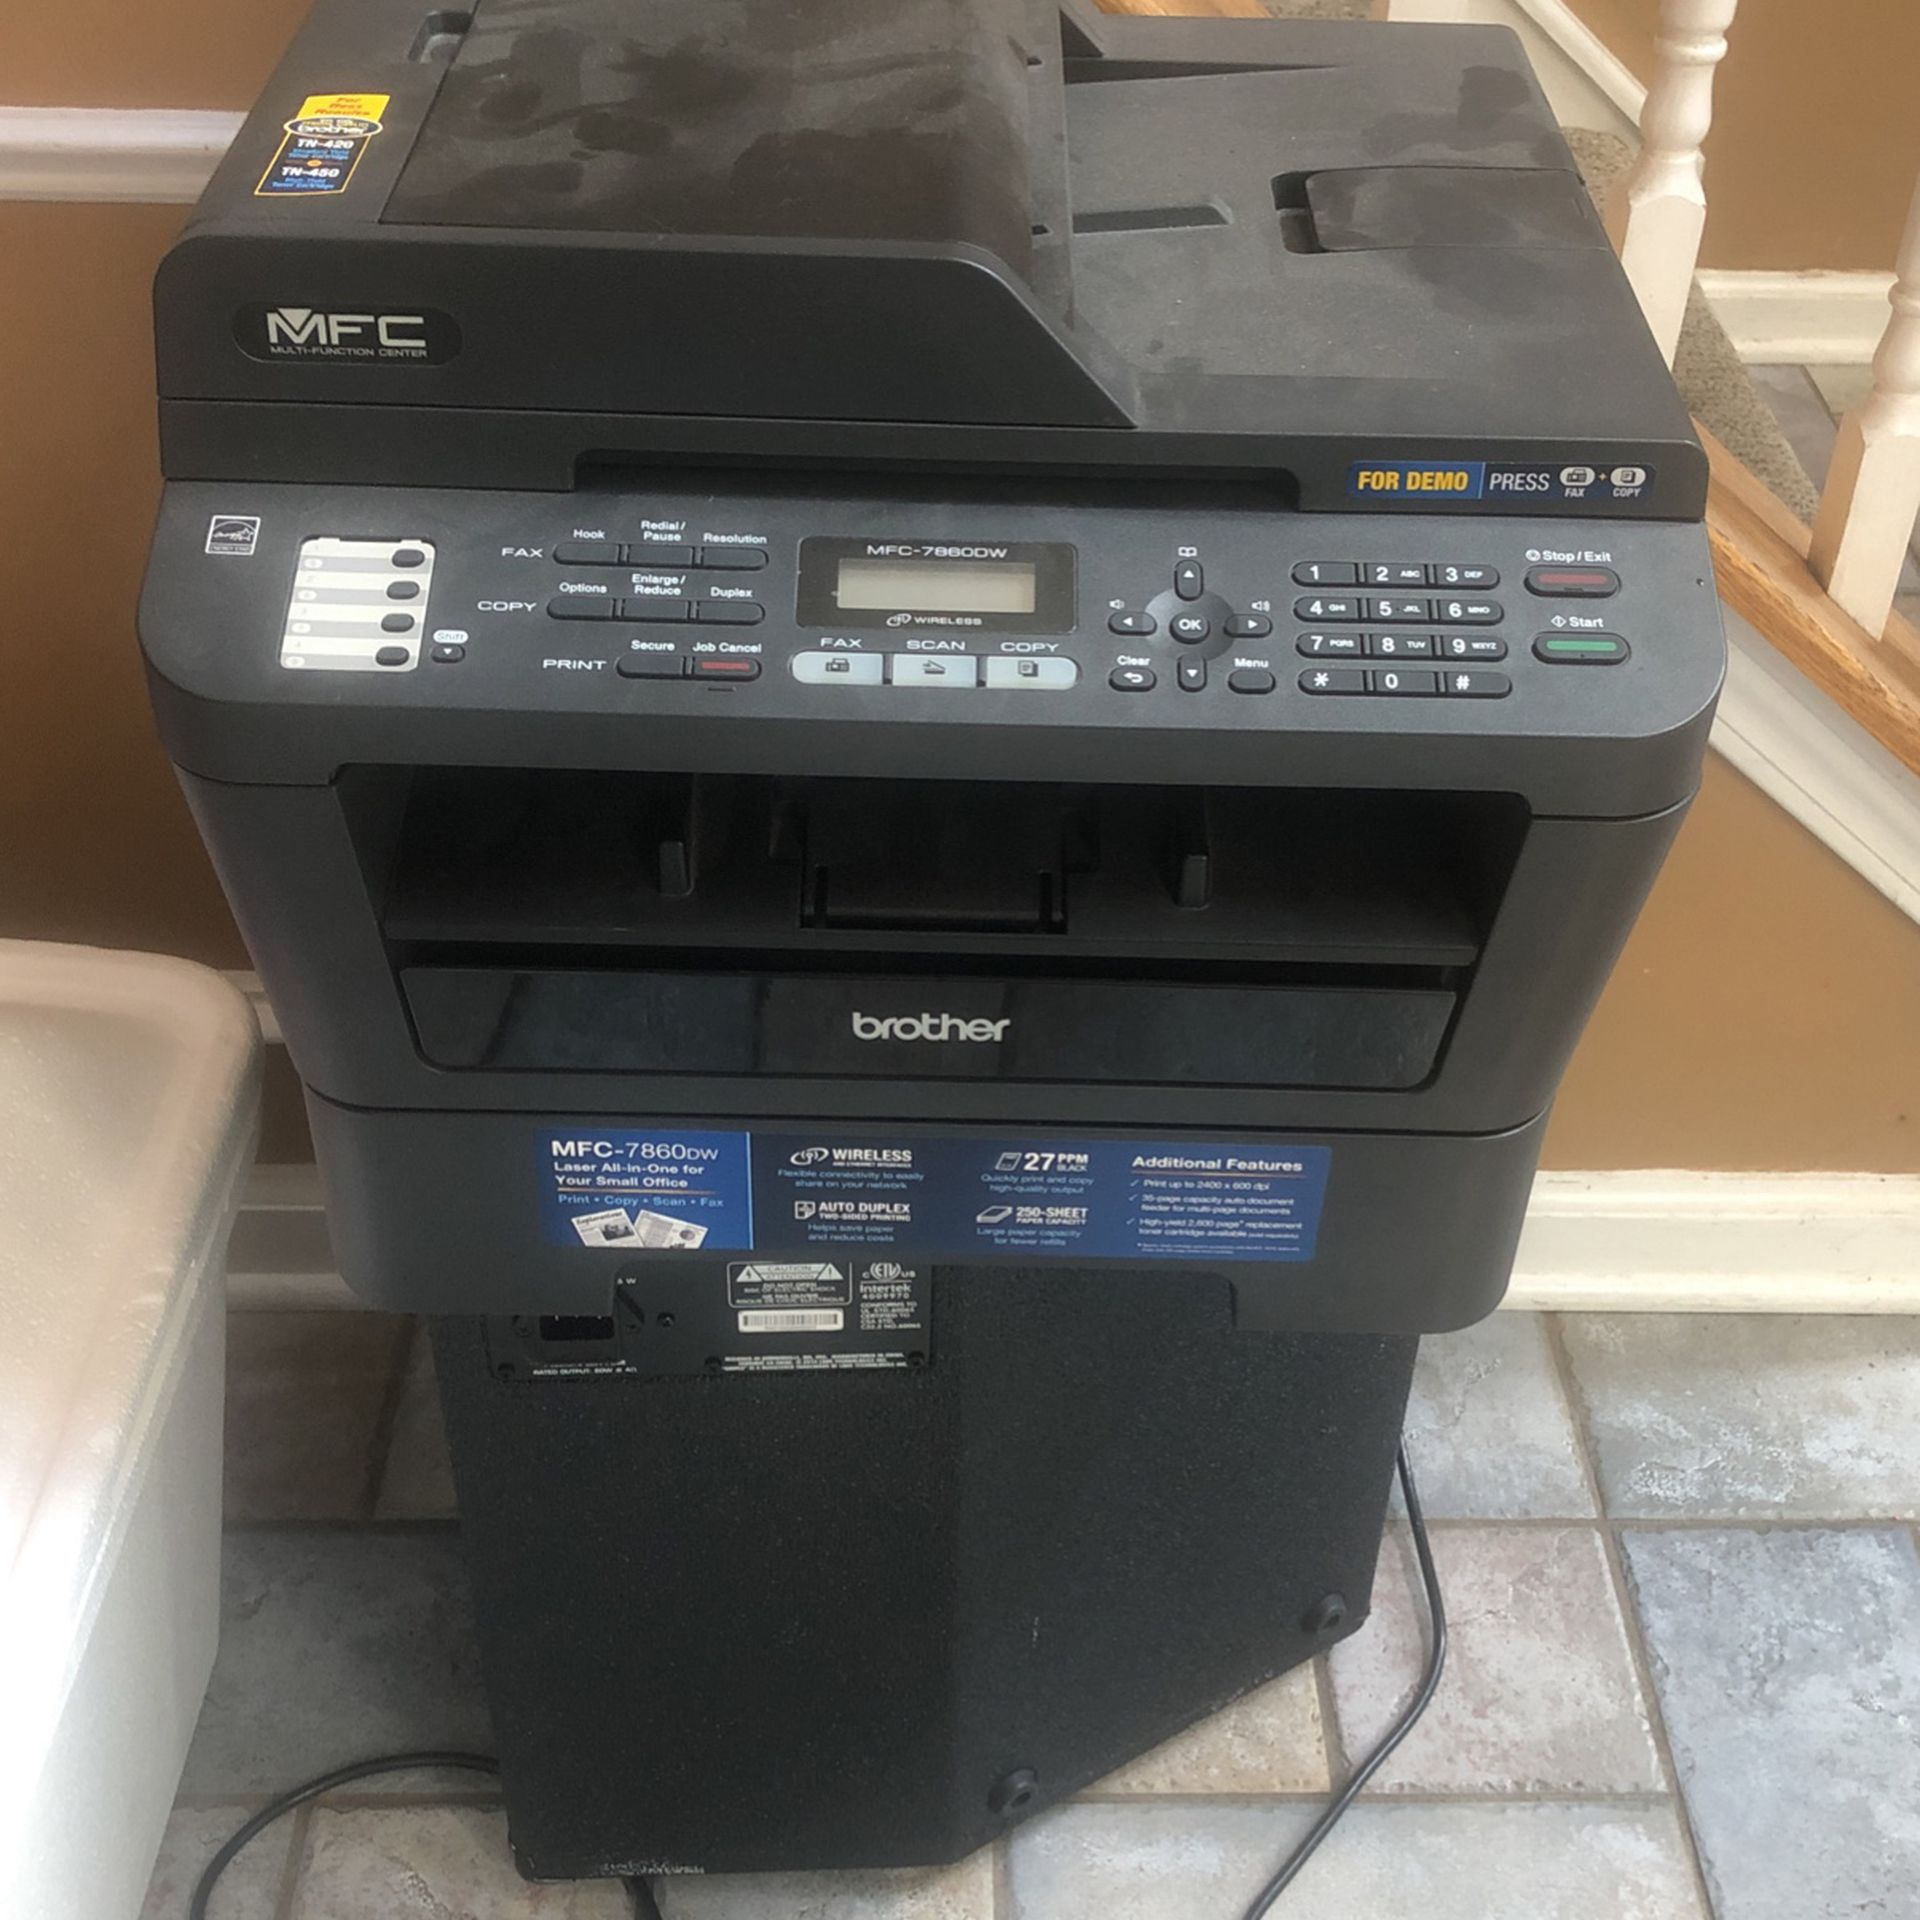 Brother scanner fax machine and printer